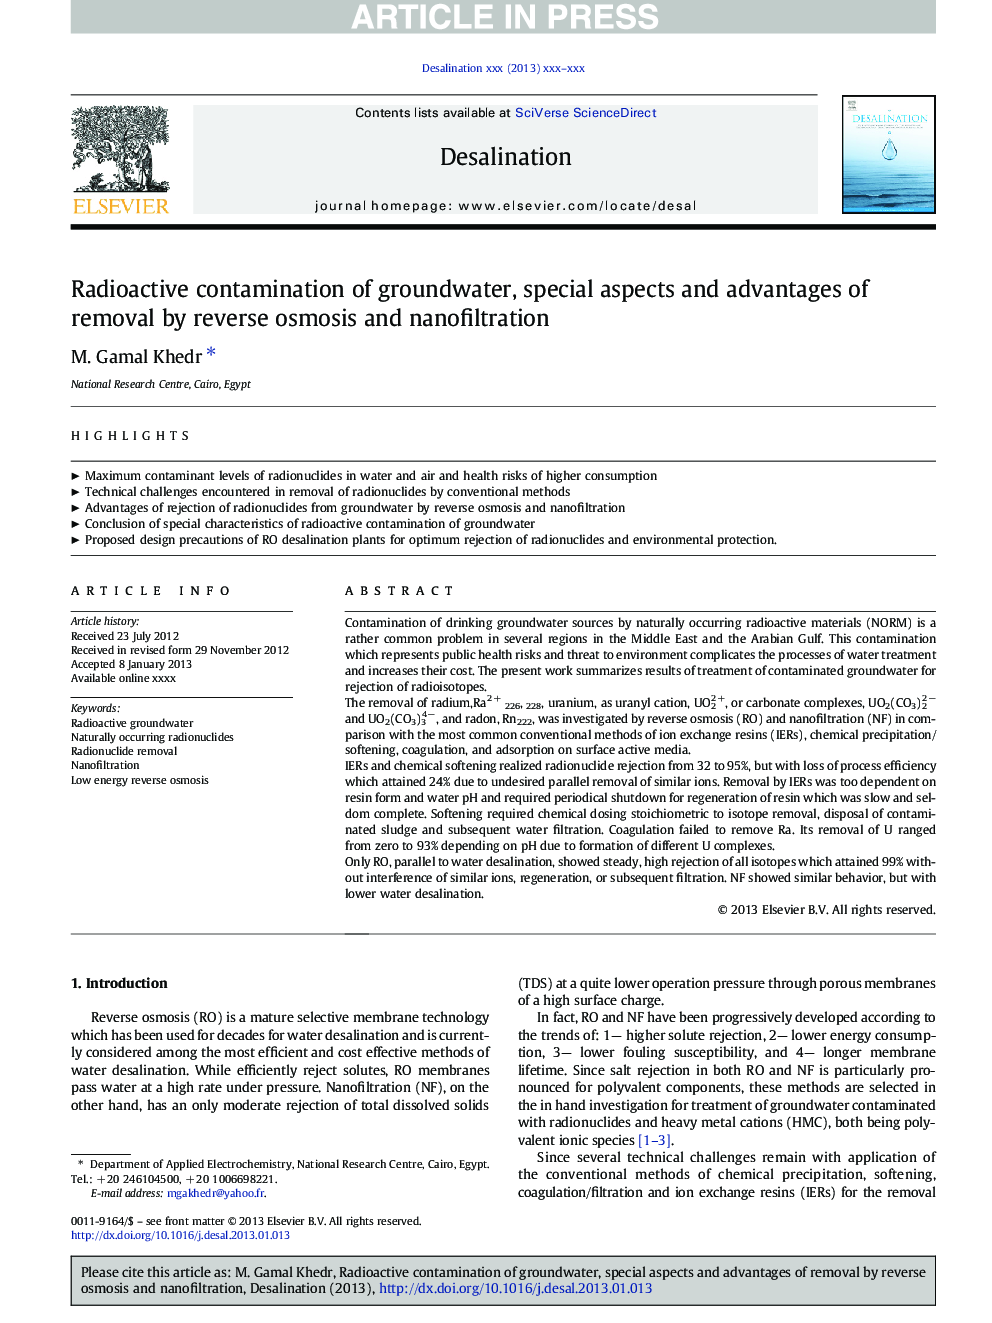 Radioactive contamination of groundwater, special aspects and advantages of removal by reverse osmosis and nanofiltration